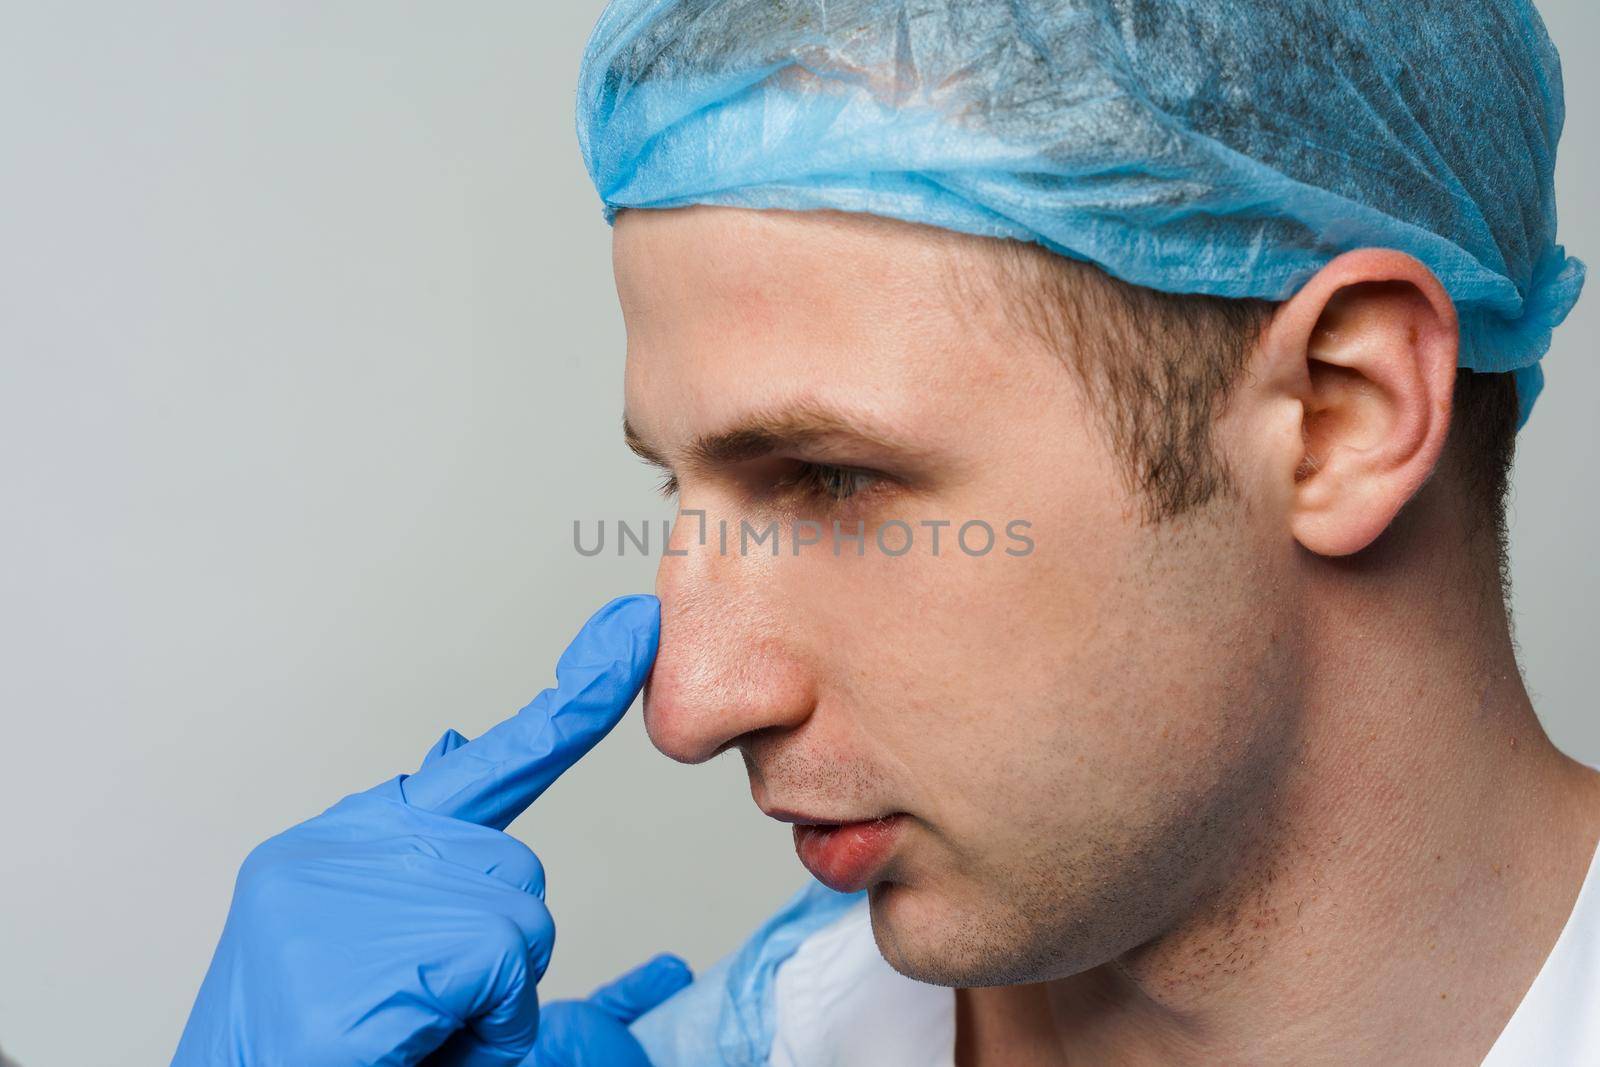 Facebuilding. Septoplasty and nose rhinoplasty. Doctor touches man nose on consultation. Inspection before plastic surgery. Cosmetic rejuvenating facial treatment.